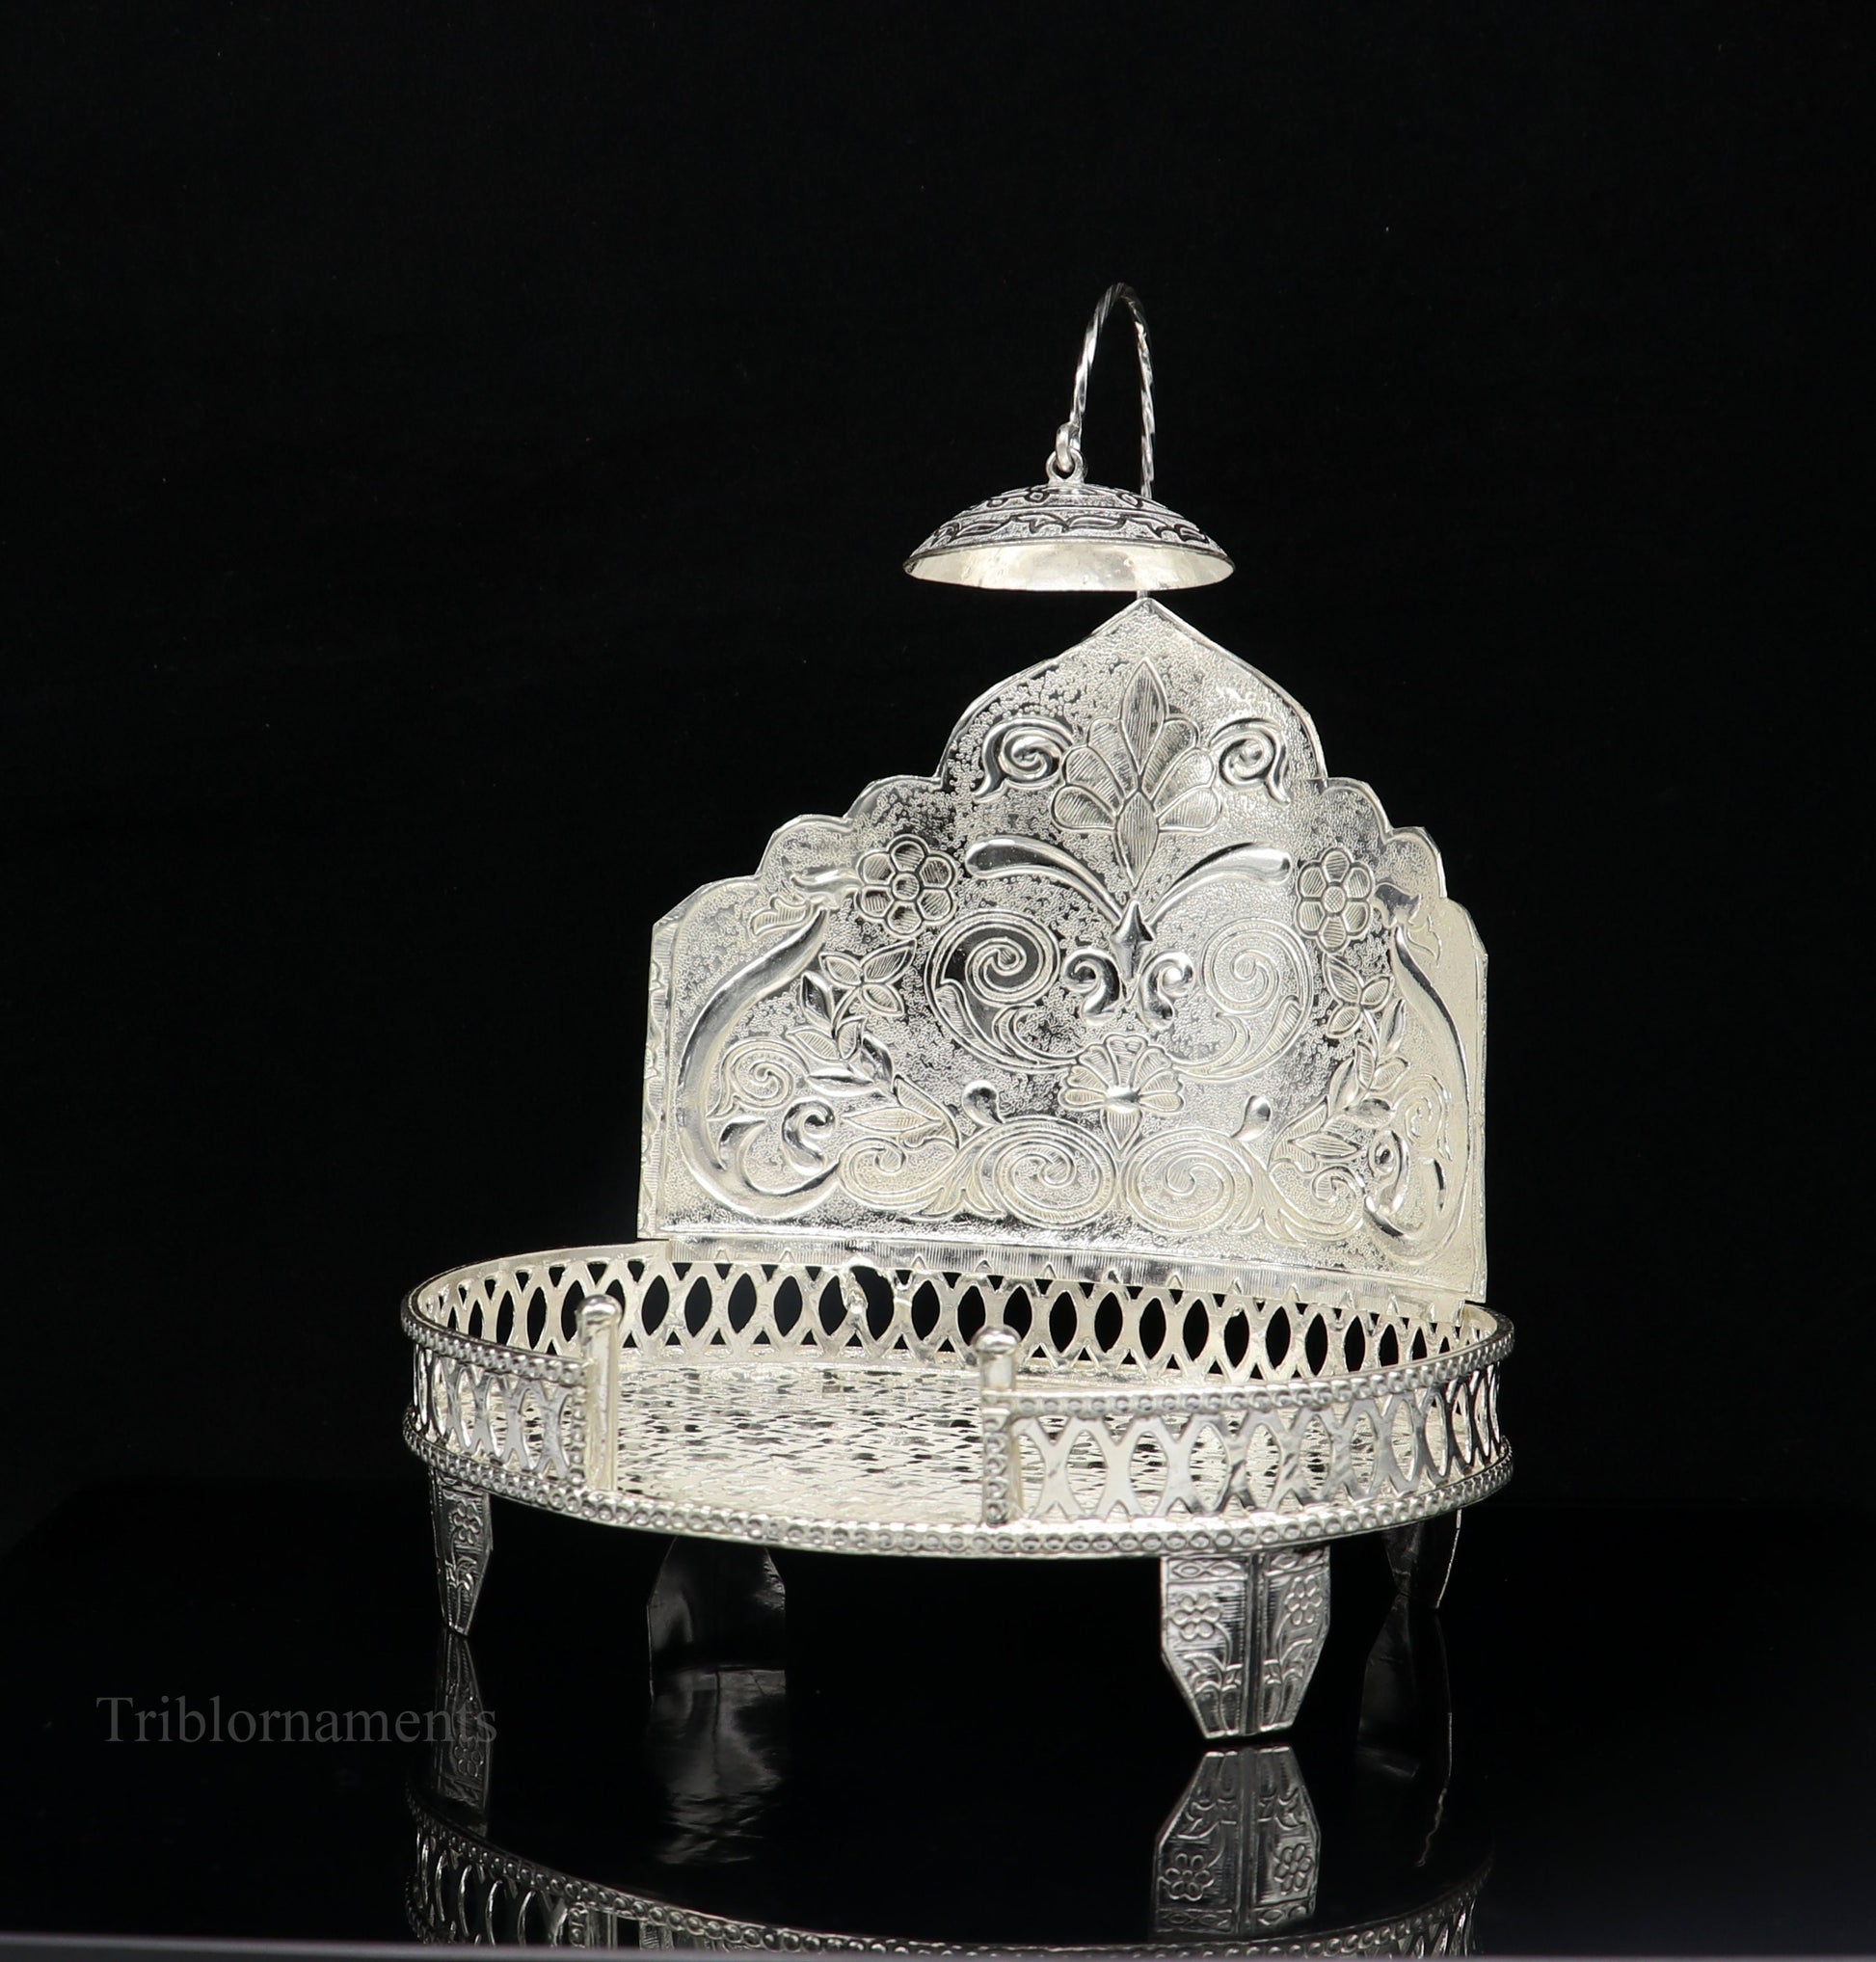 925 pure sterling silver vintage design Singhasan, idol Krishna, Ganesh throne, god statue's stand chair, temple puja article India su472 - TRIBAL ORNAMENTS